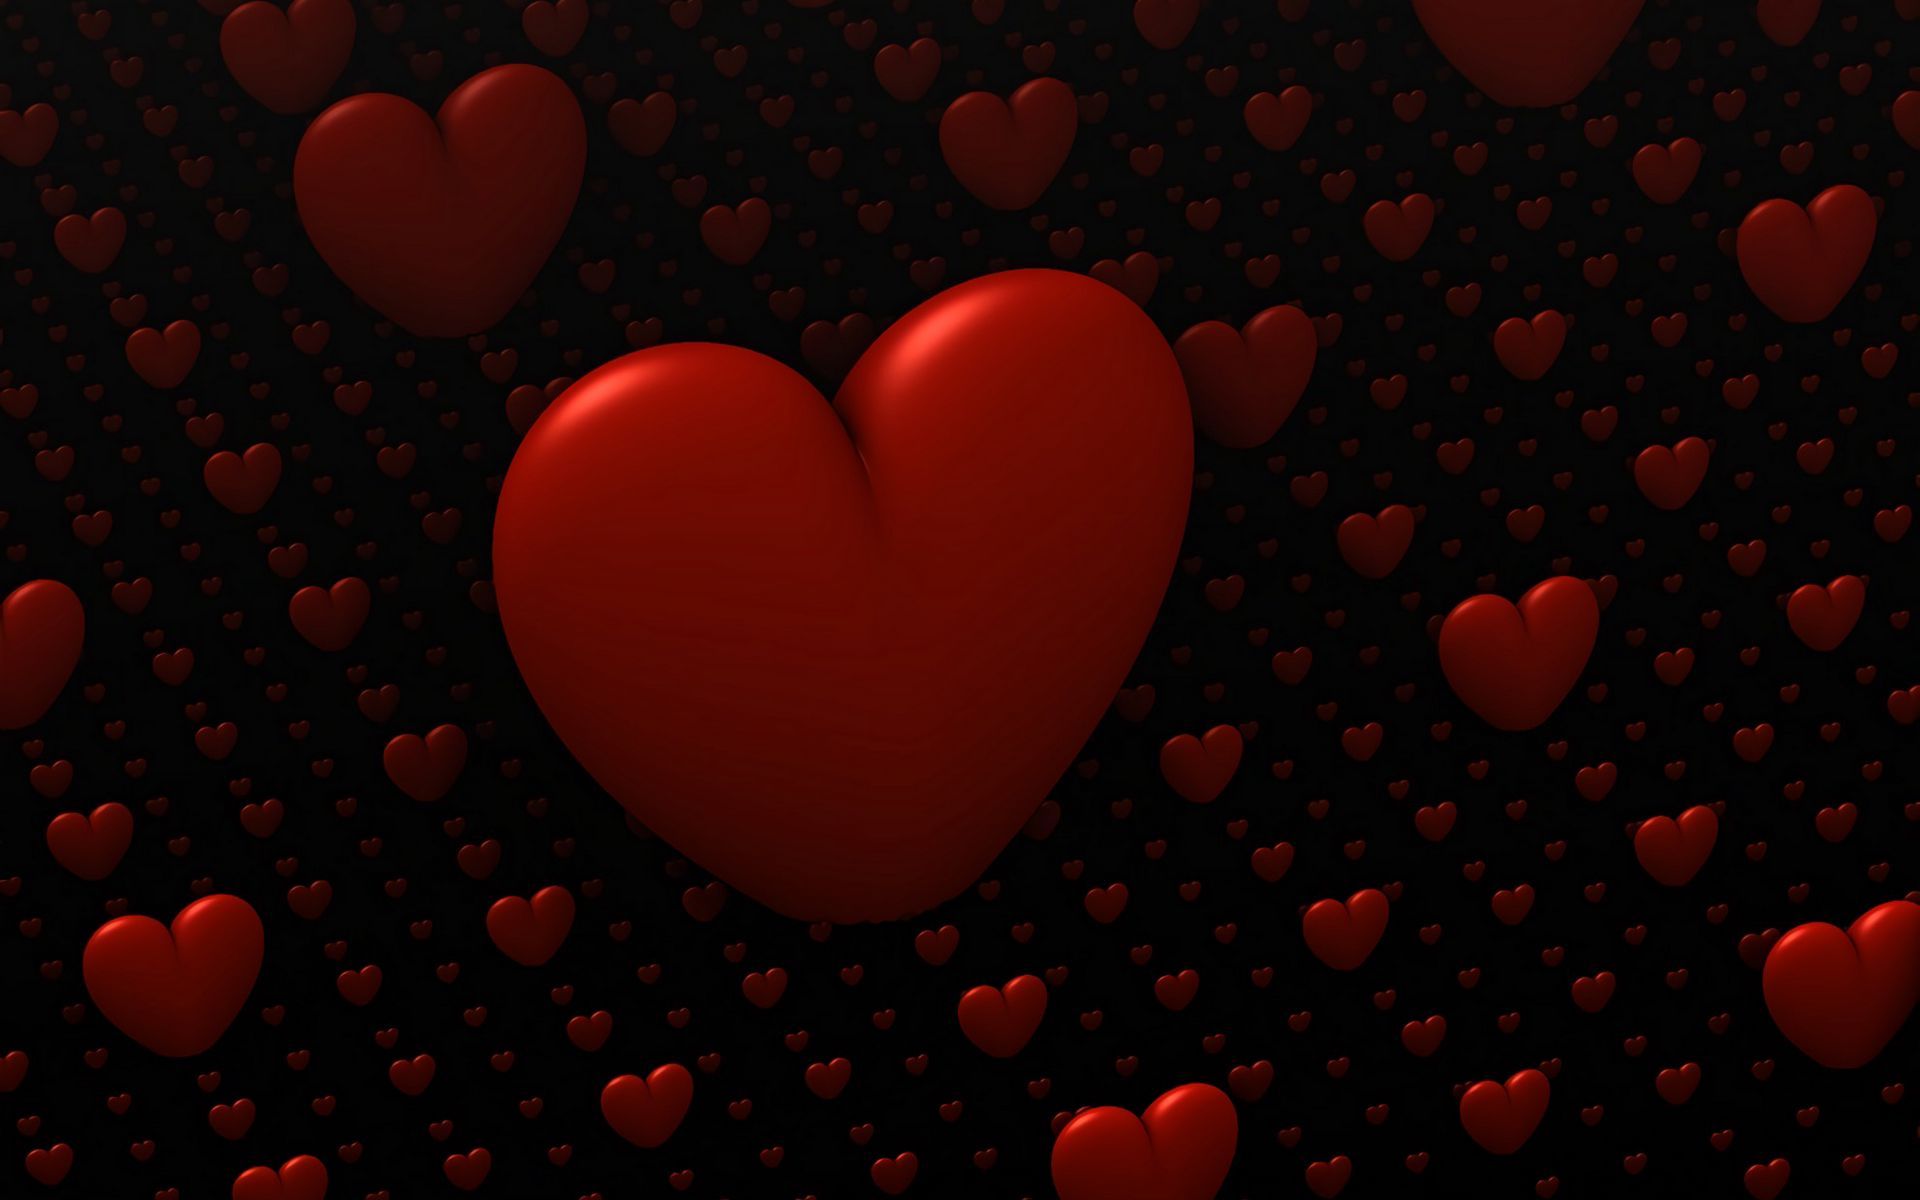 Download wallpaper 1920x1200 hearts, love, 3D, red widescreen 16:10 HD background